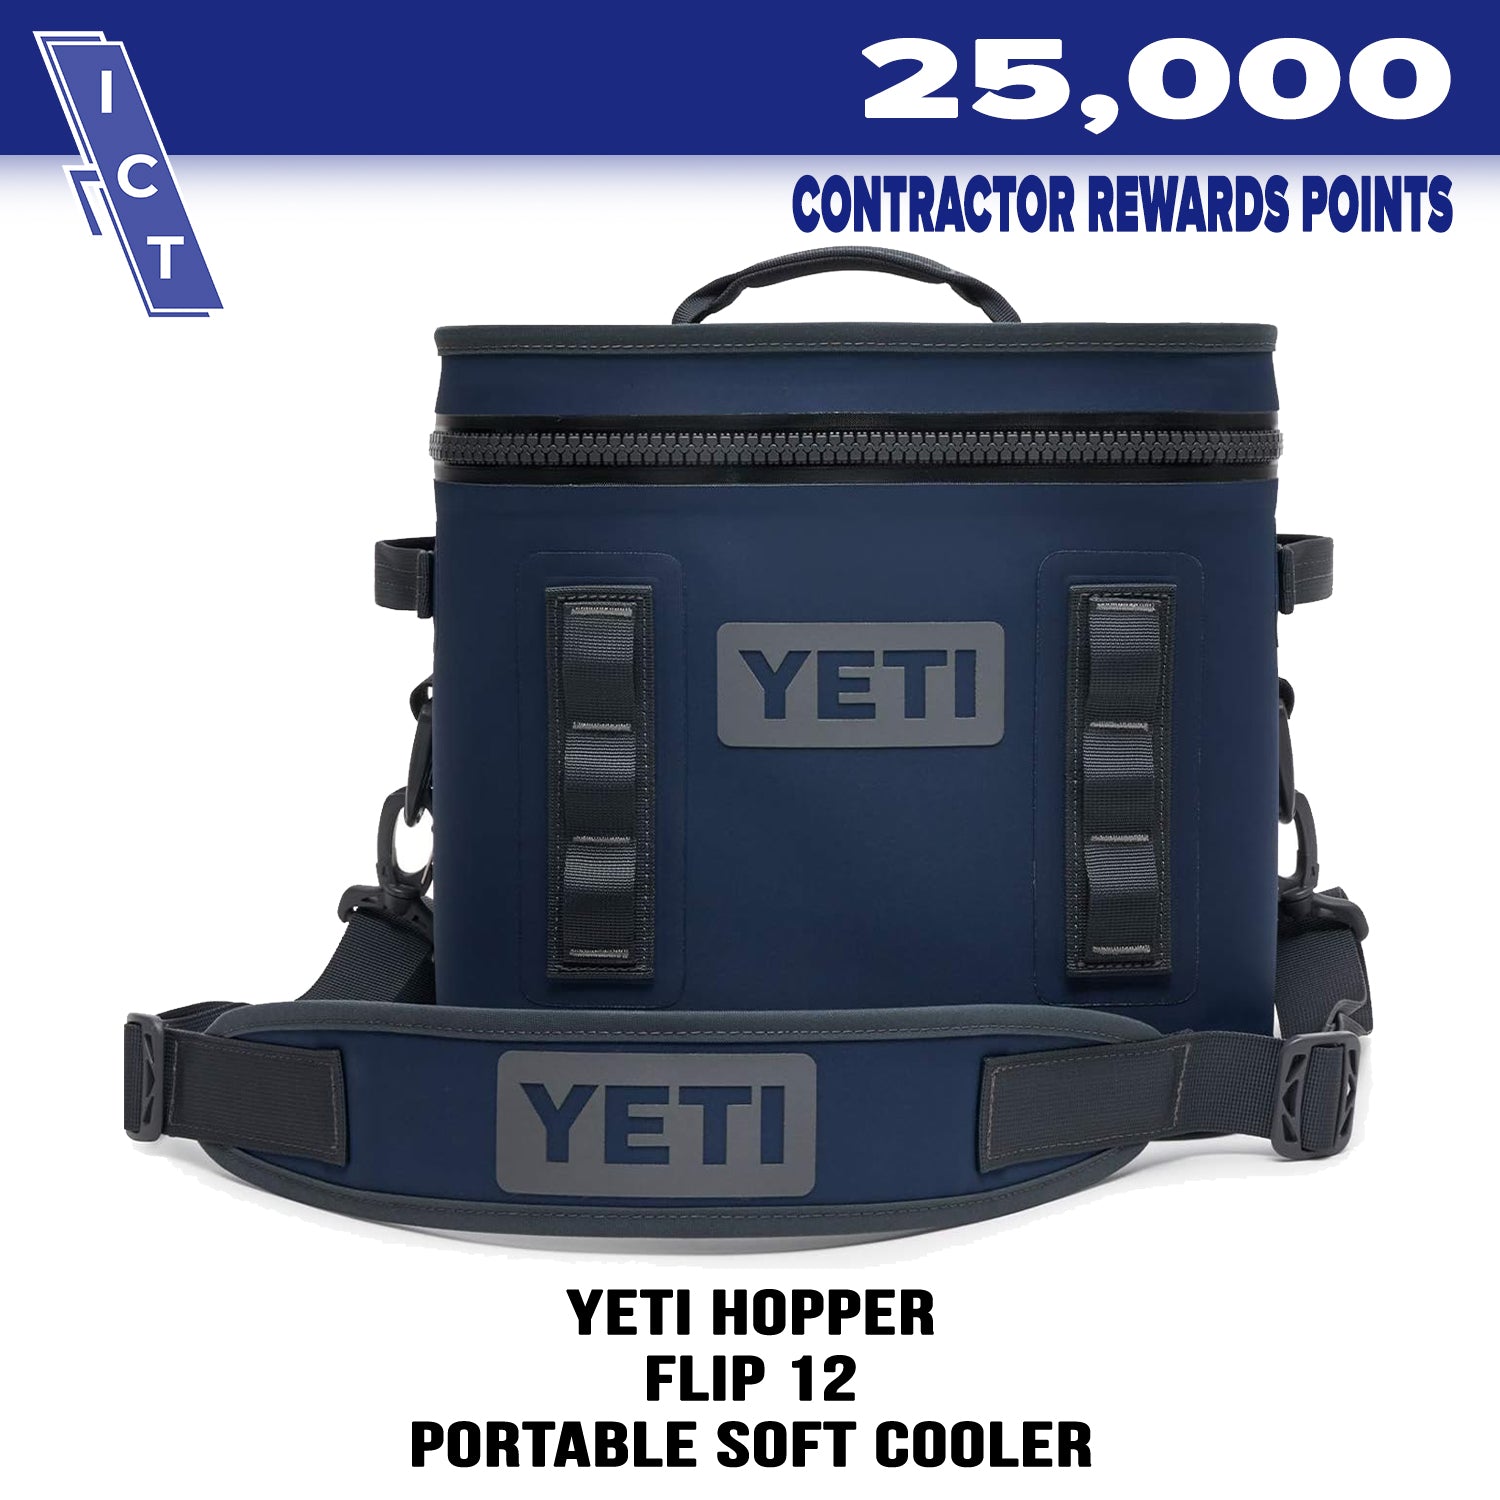 Yeti Hopper cooler prize for 25000 points